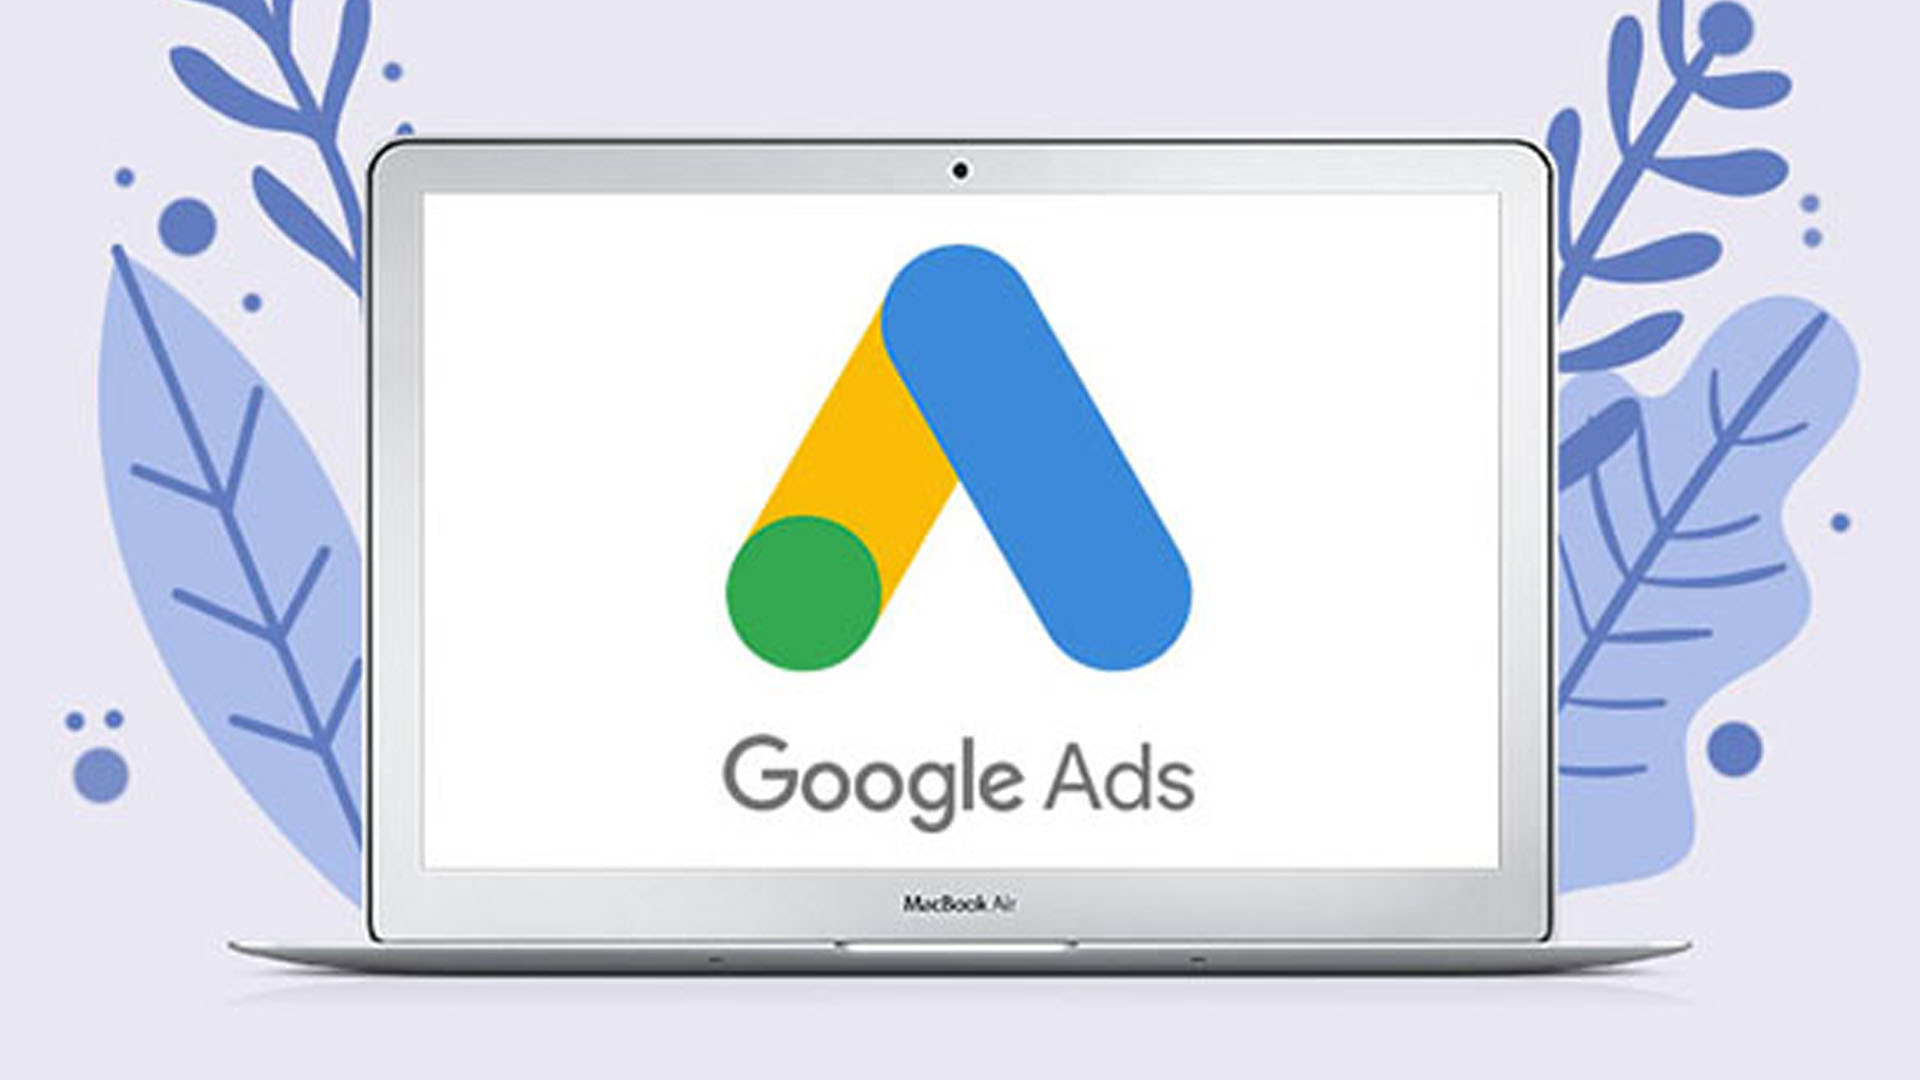 What is a Conversion in Google Ads?